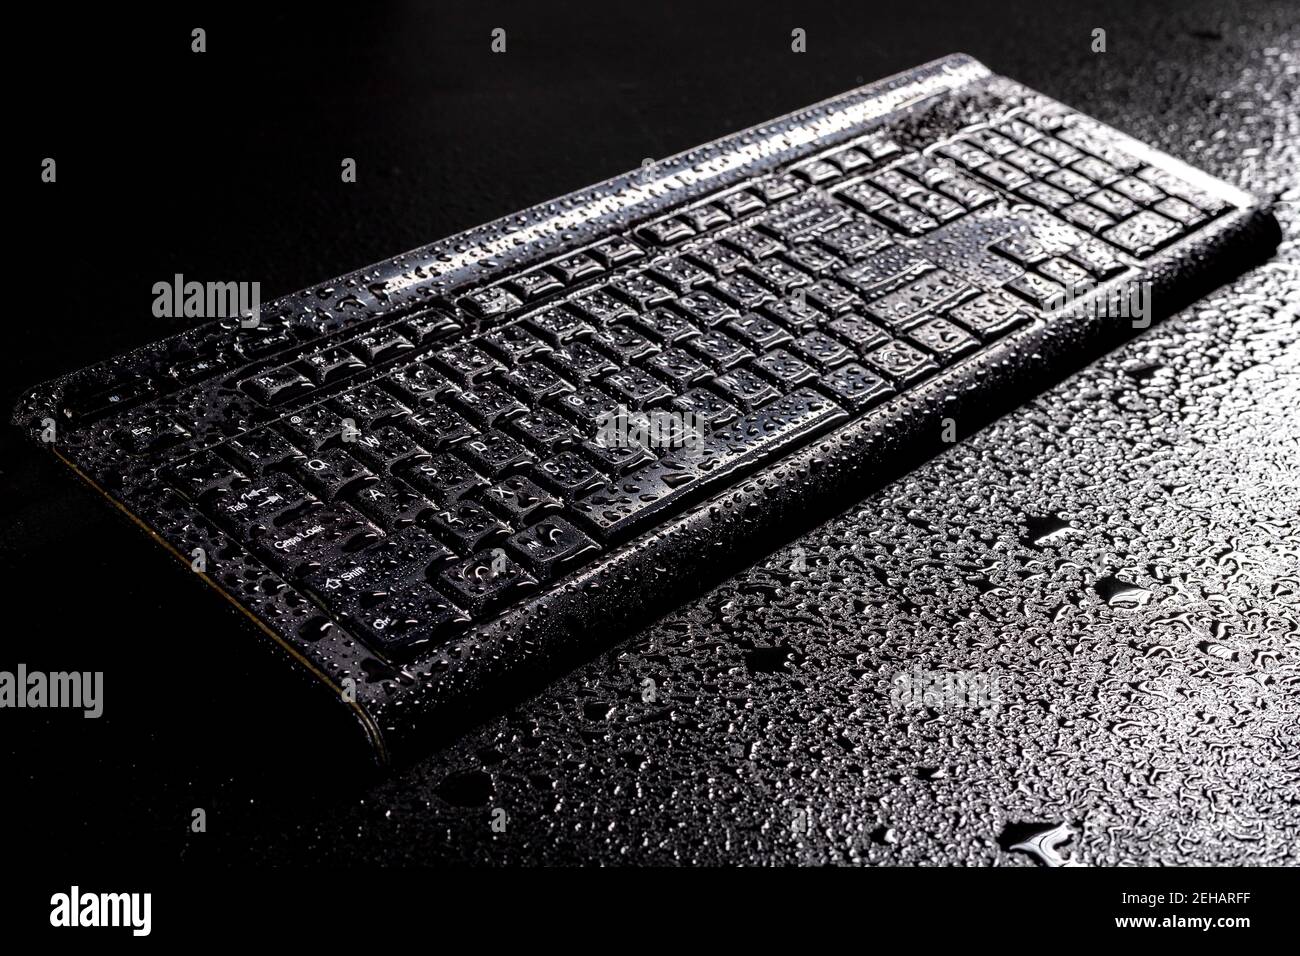 Wet keyboard from a personal computer. Water drops on an electronic device. Dark background. Stock Photo